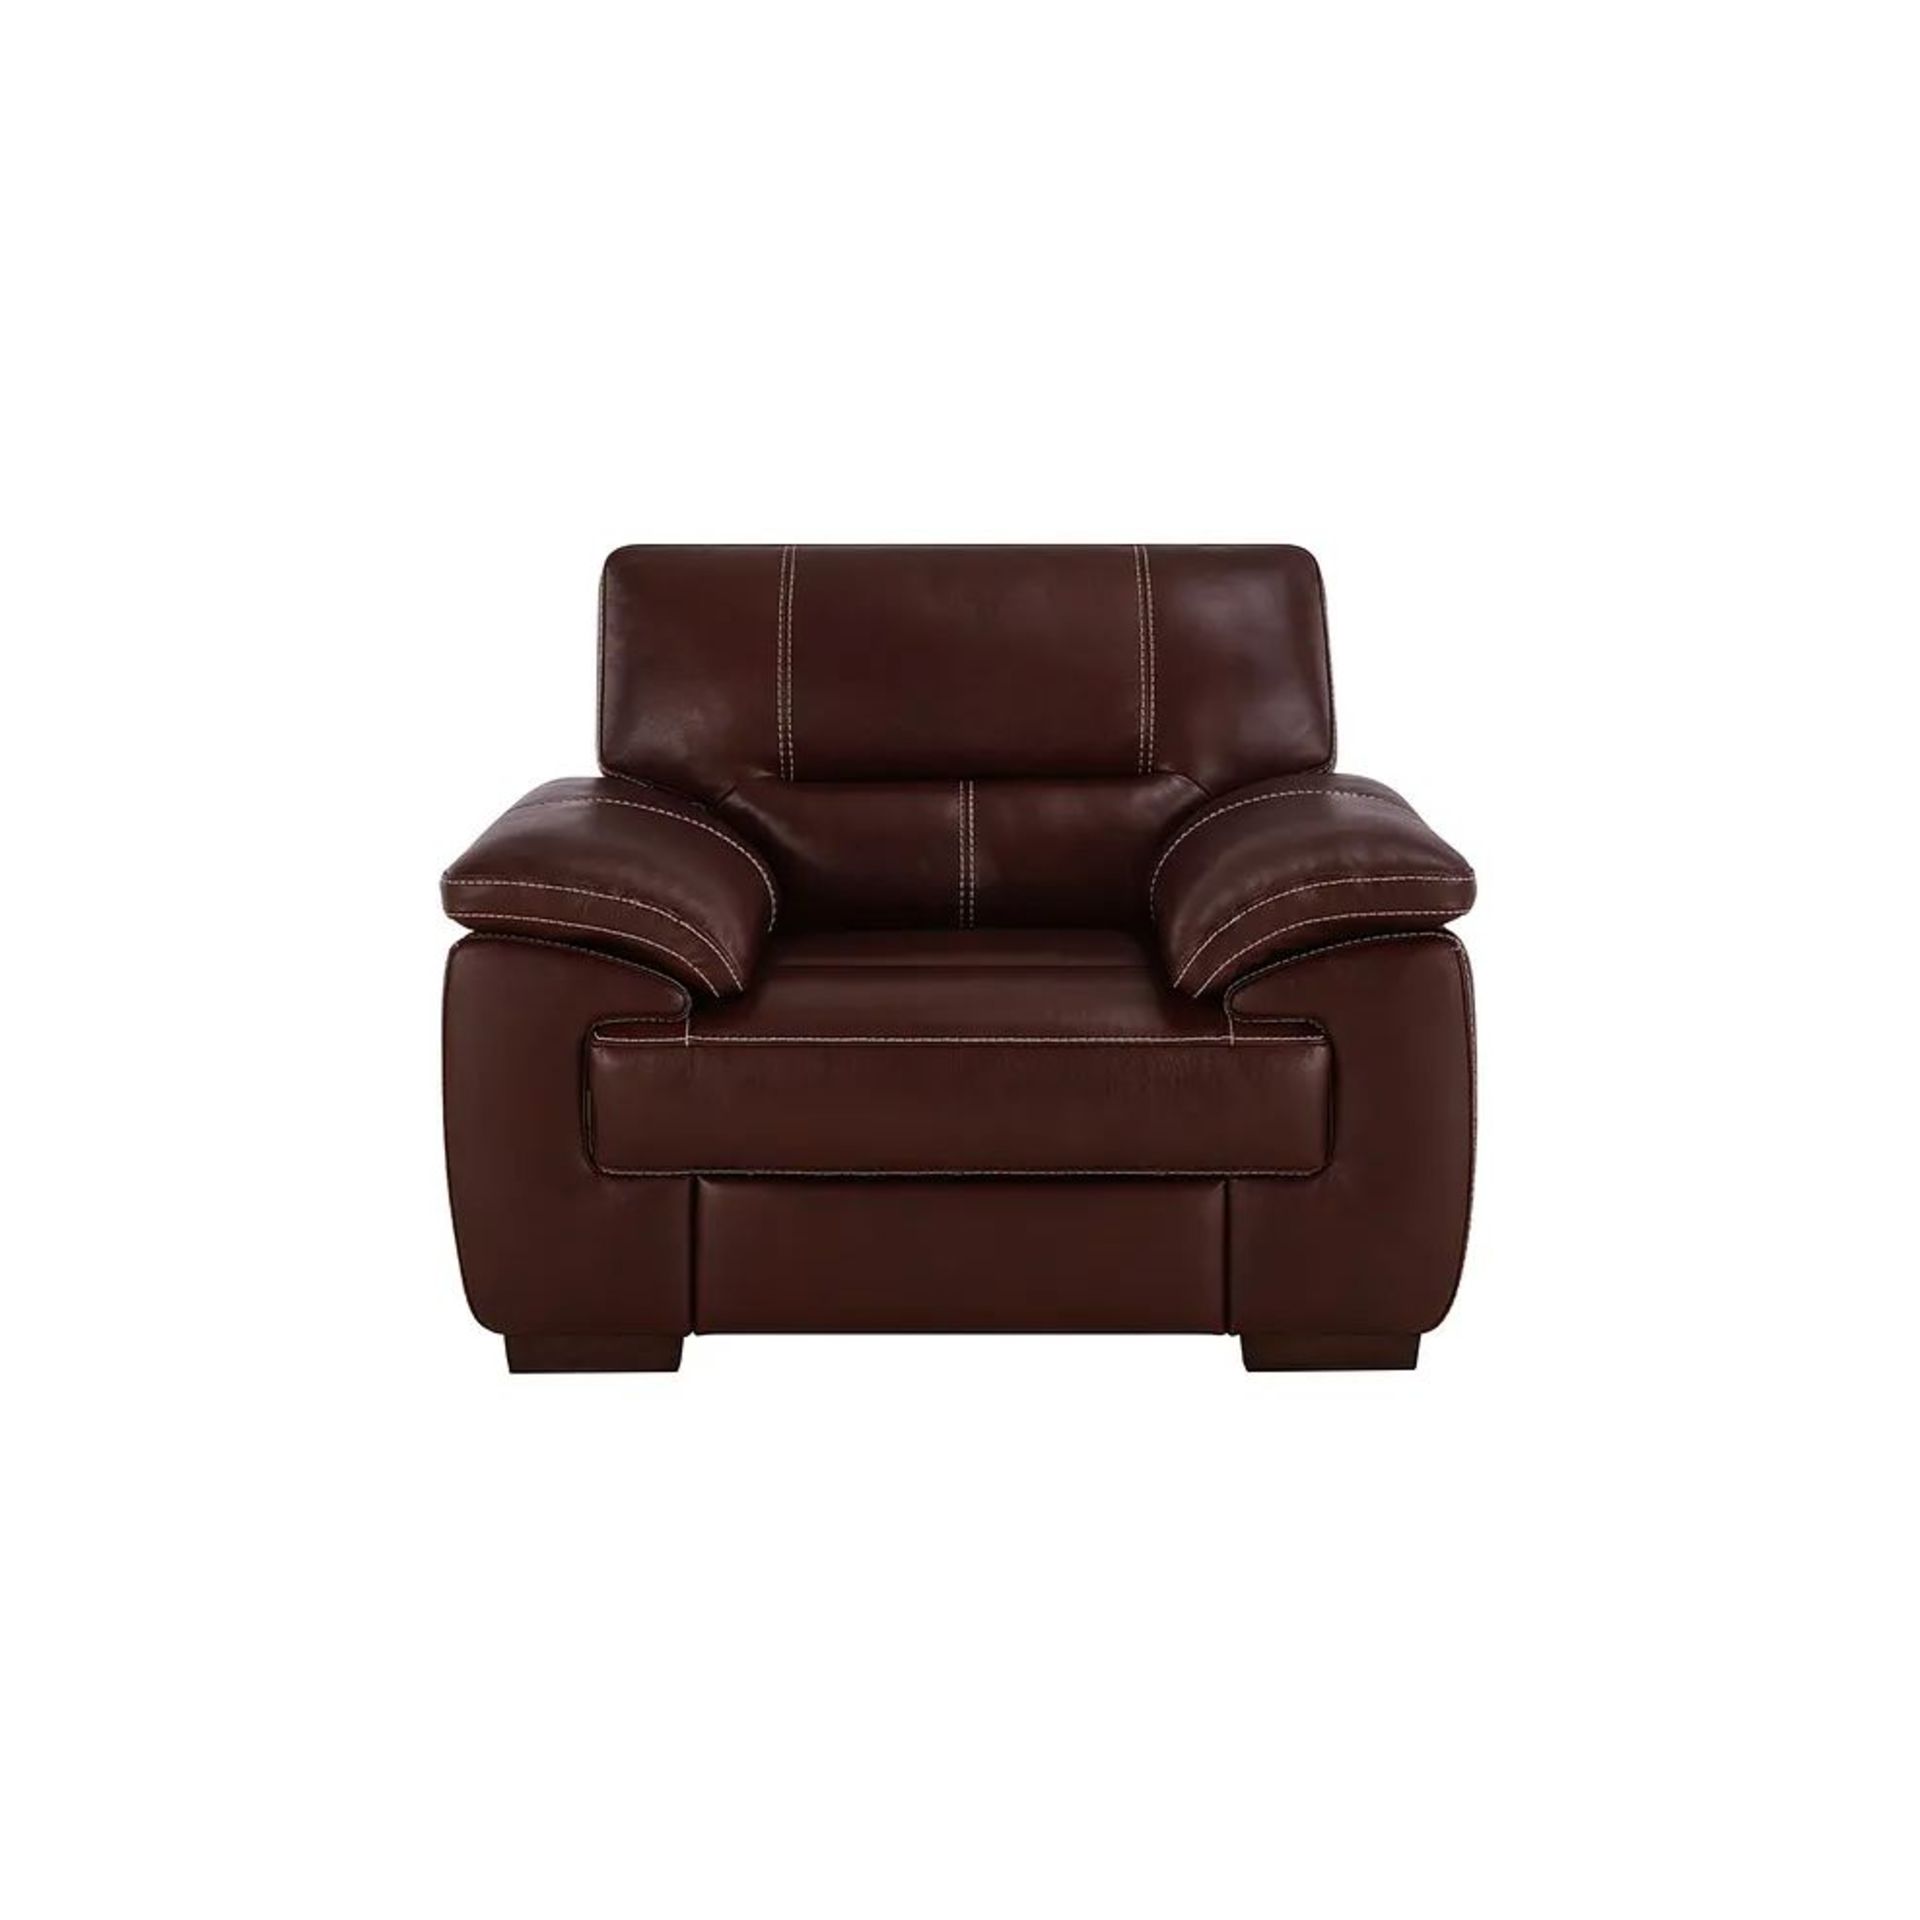 BRAND NEW ARLINGTON Electric Recliner Armchair - TAN LEATHER. RRP £1199. Create a traditional and - Image 2 of 12